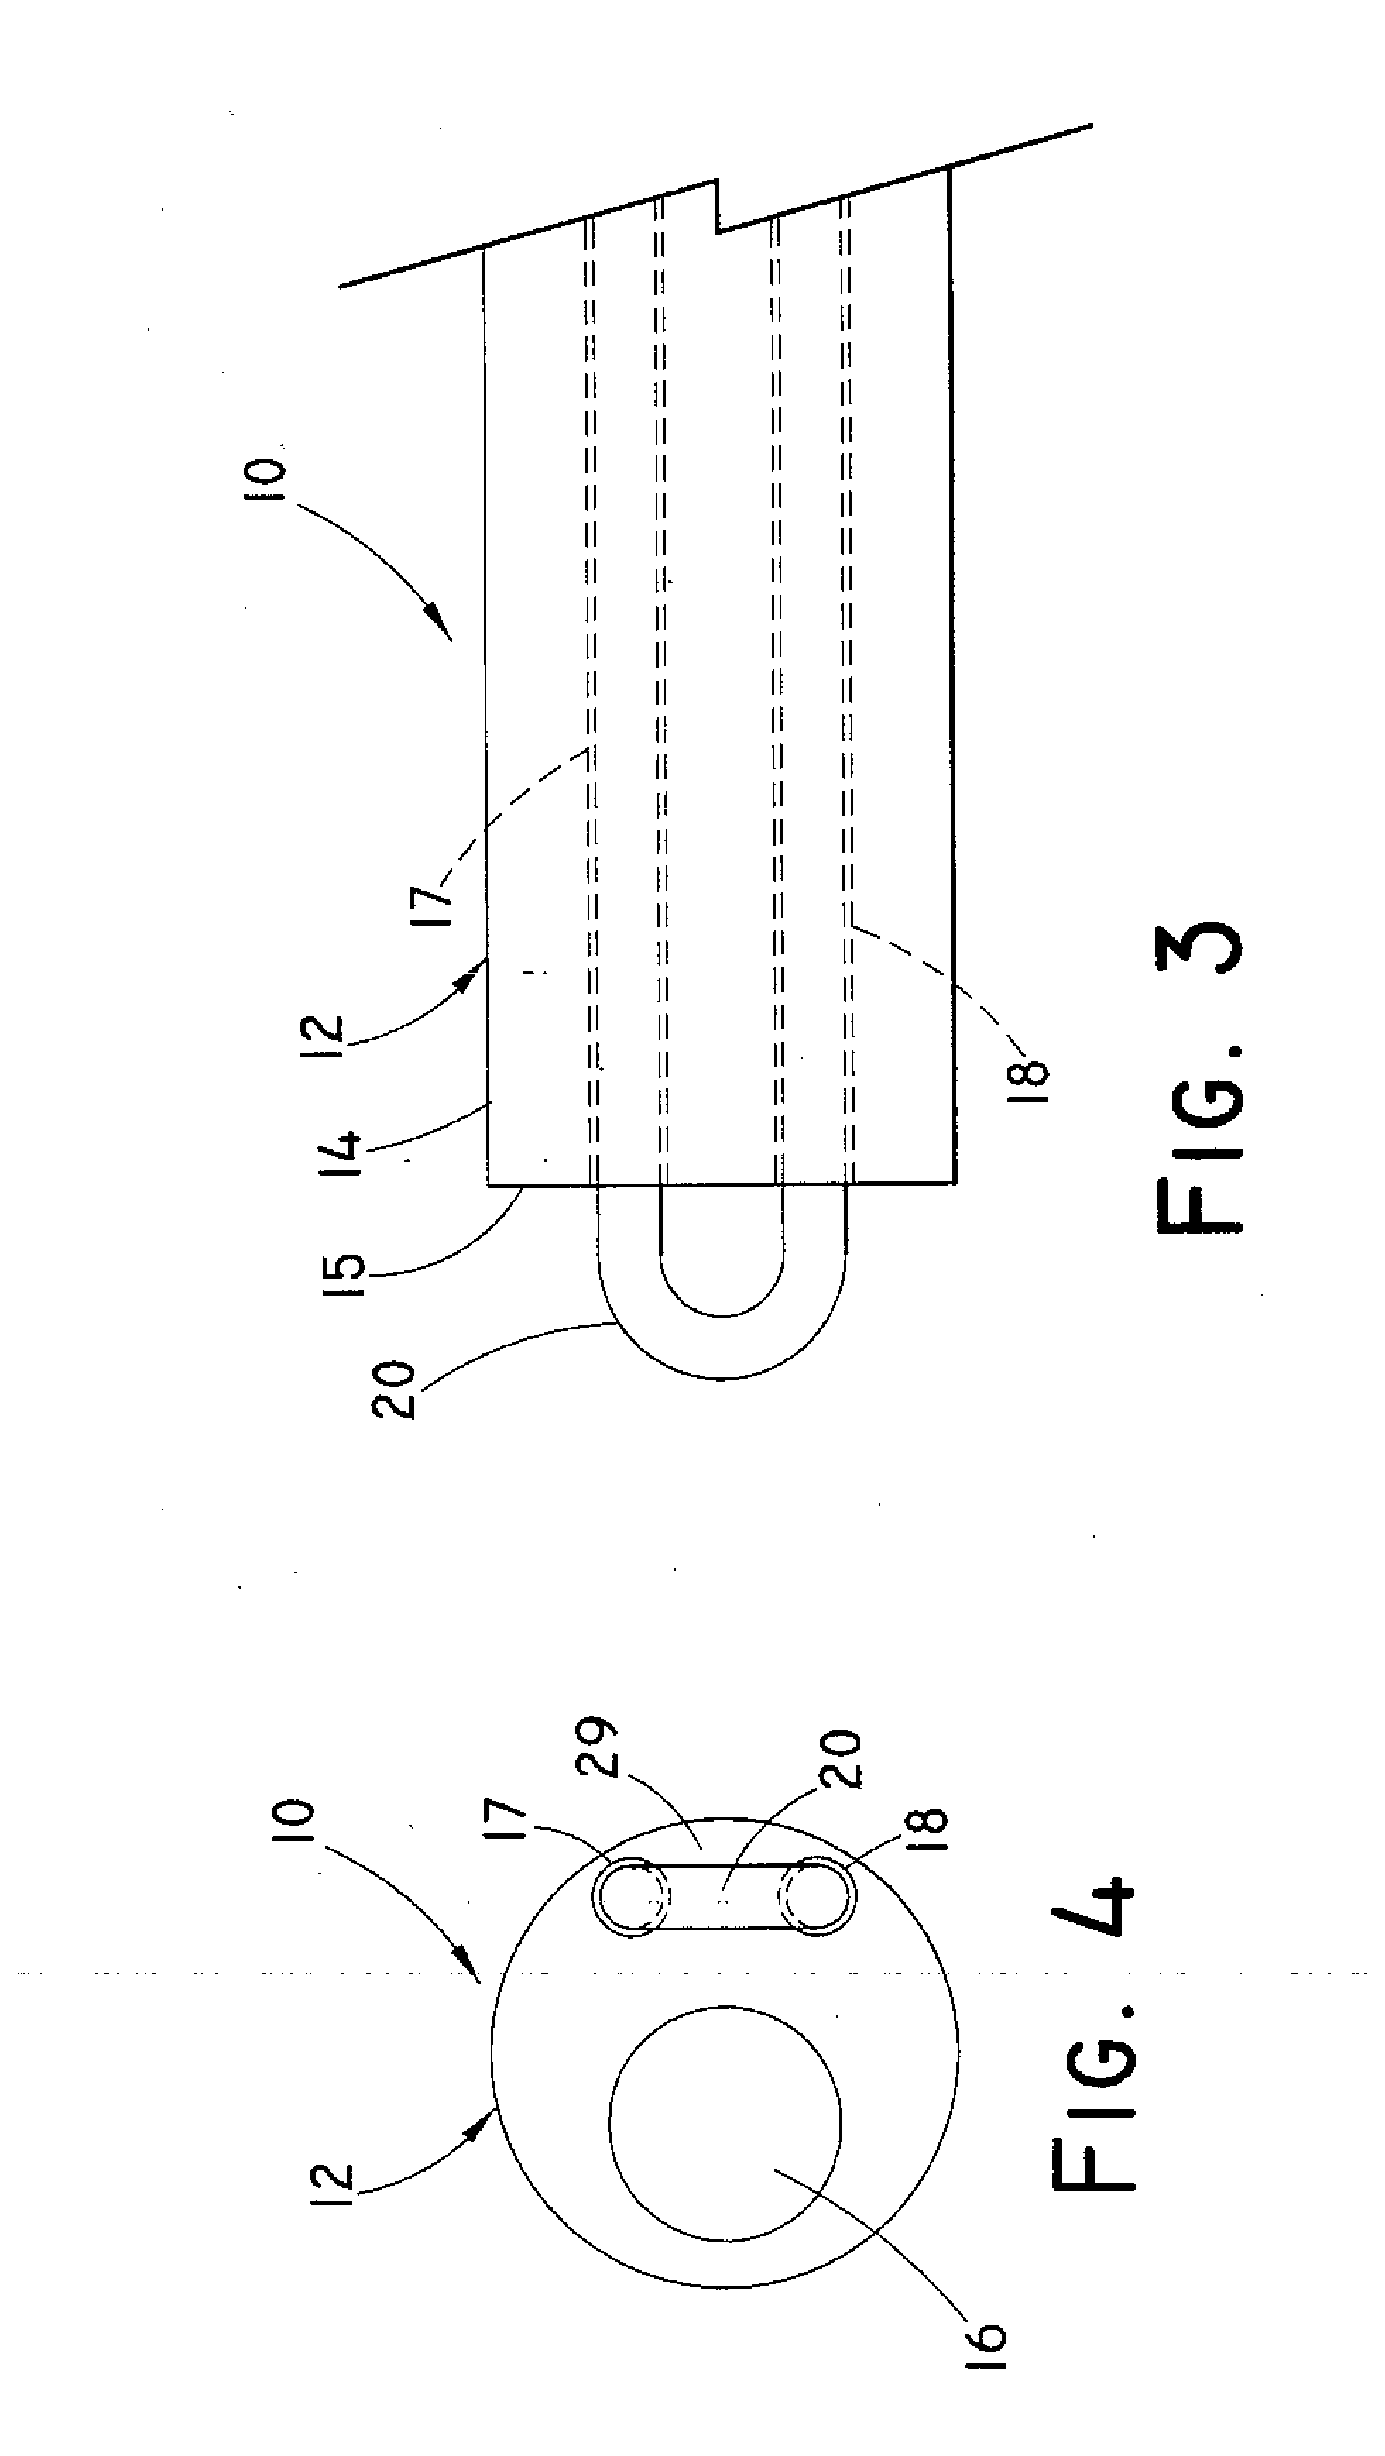 Device for extracting an elongated structure implanted in biological tissue